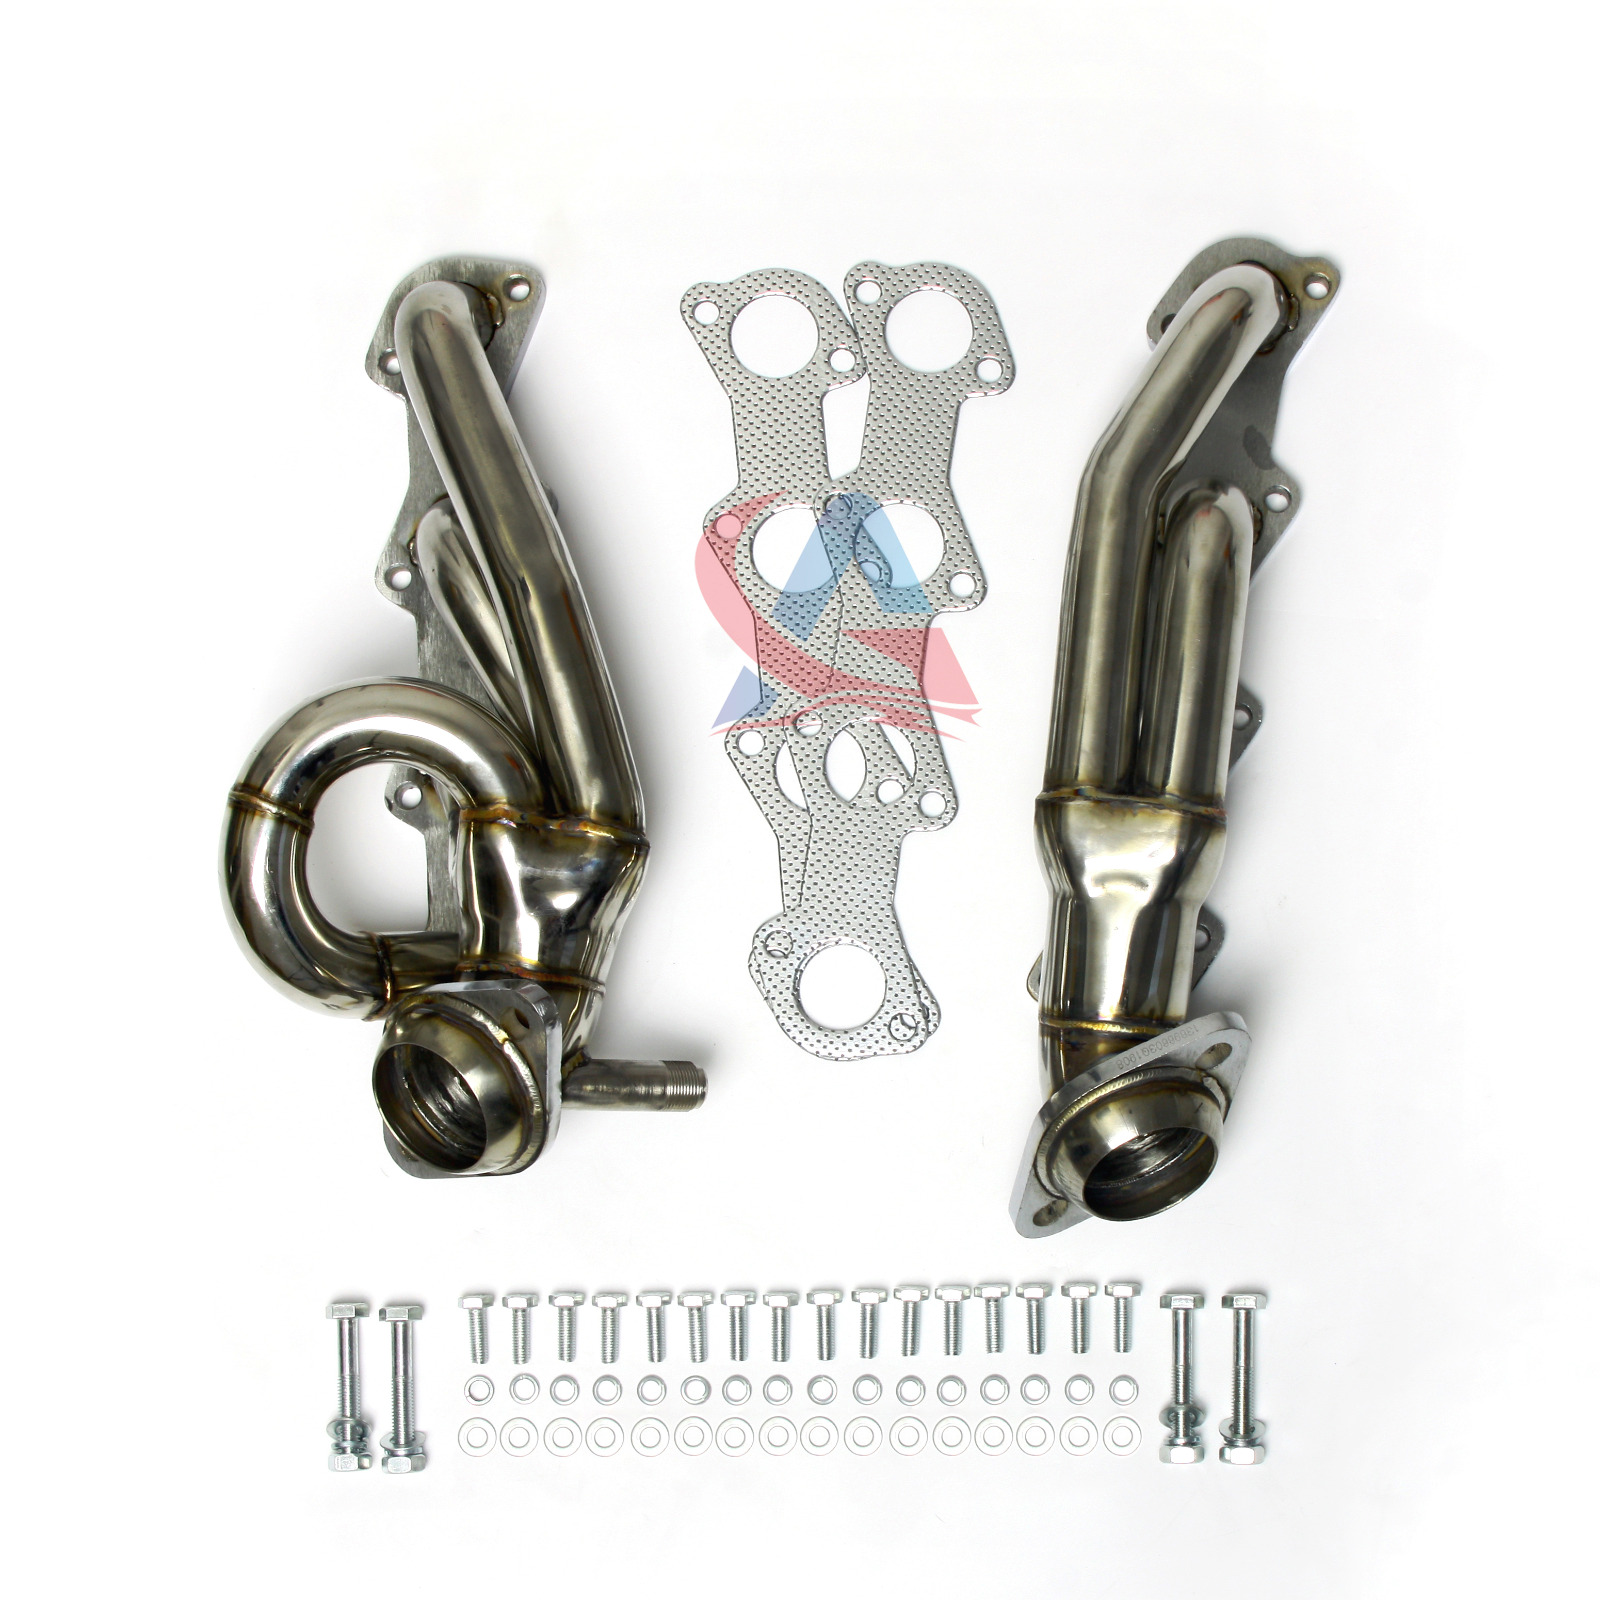 For Ford F150/F250/Expedition 4.6L V8 Truck/SUV Exhaust Manifold Headers Gaskets